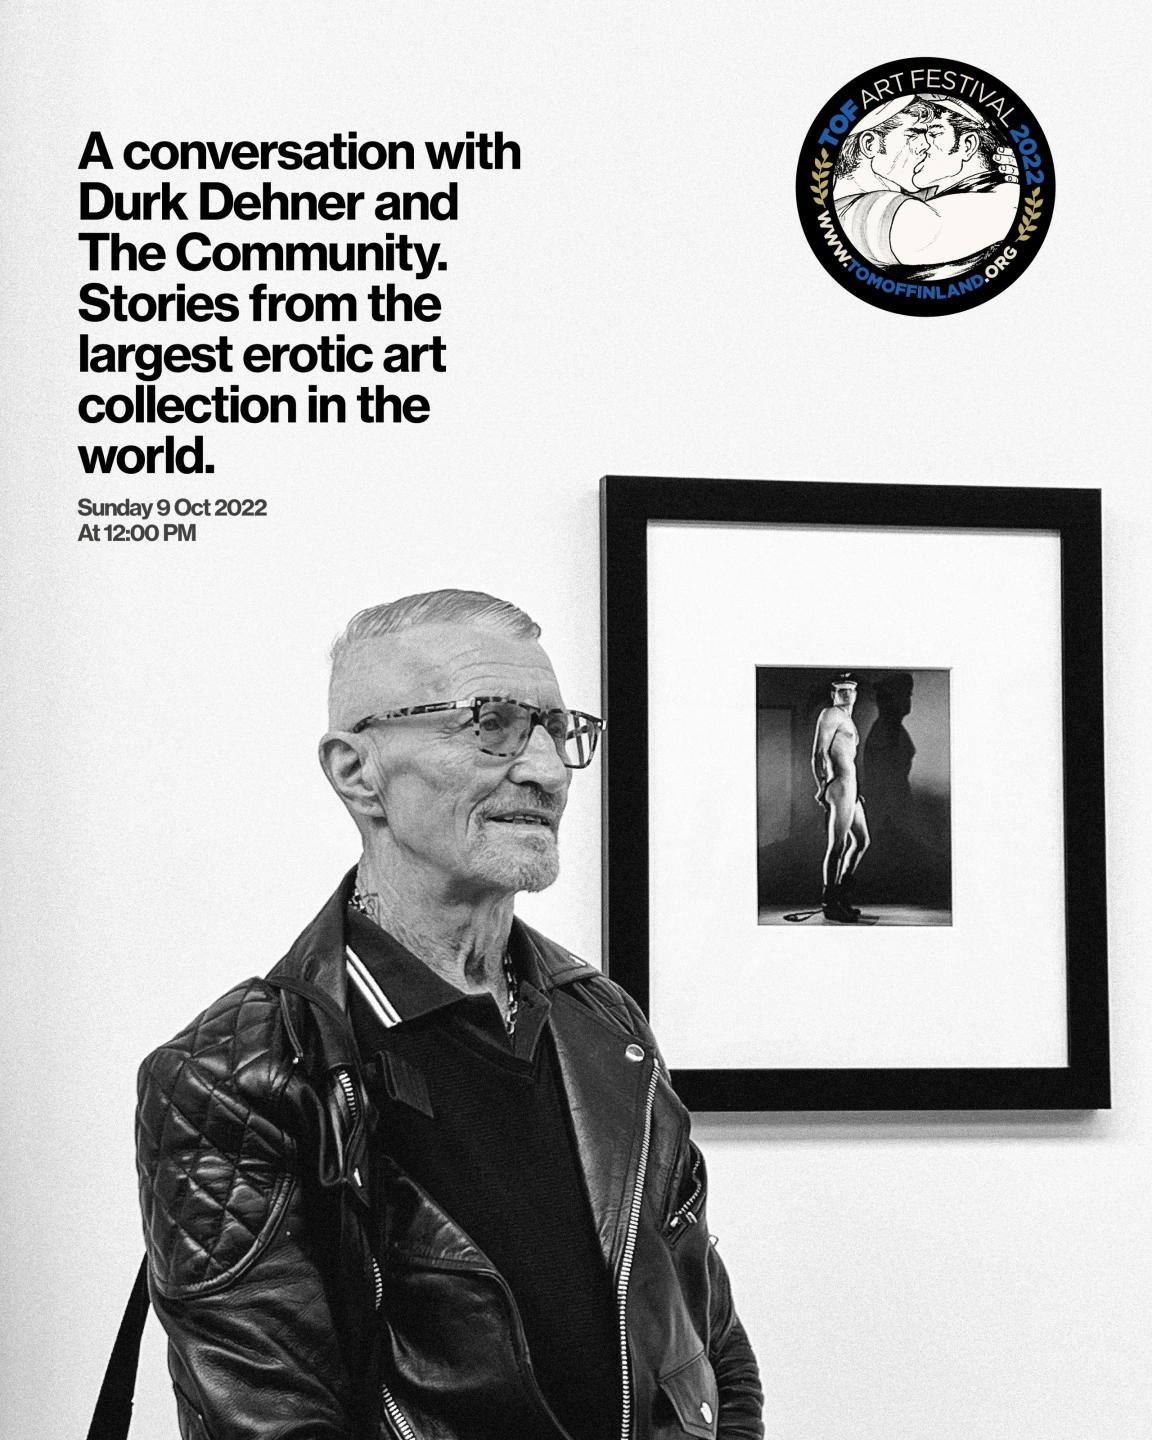 The Community at Tom of Finland Foundation Arts and Culture Festival in London 2022